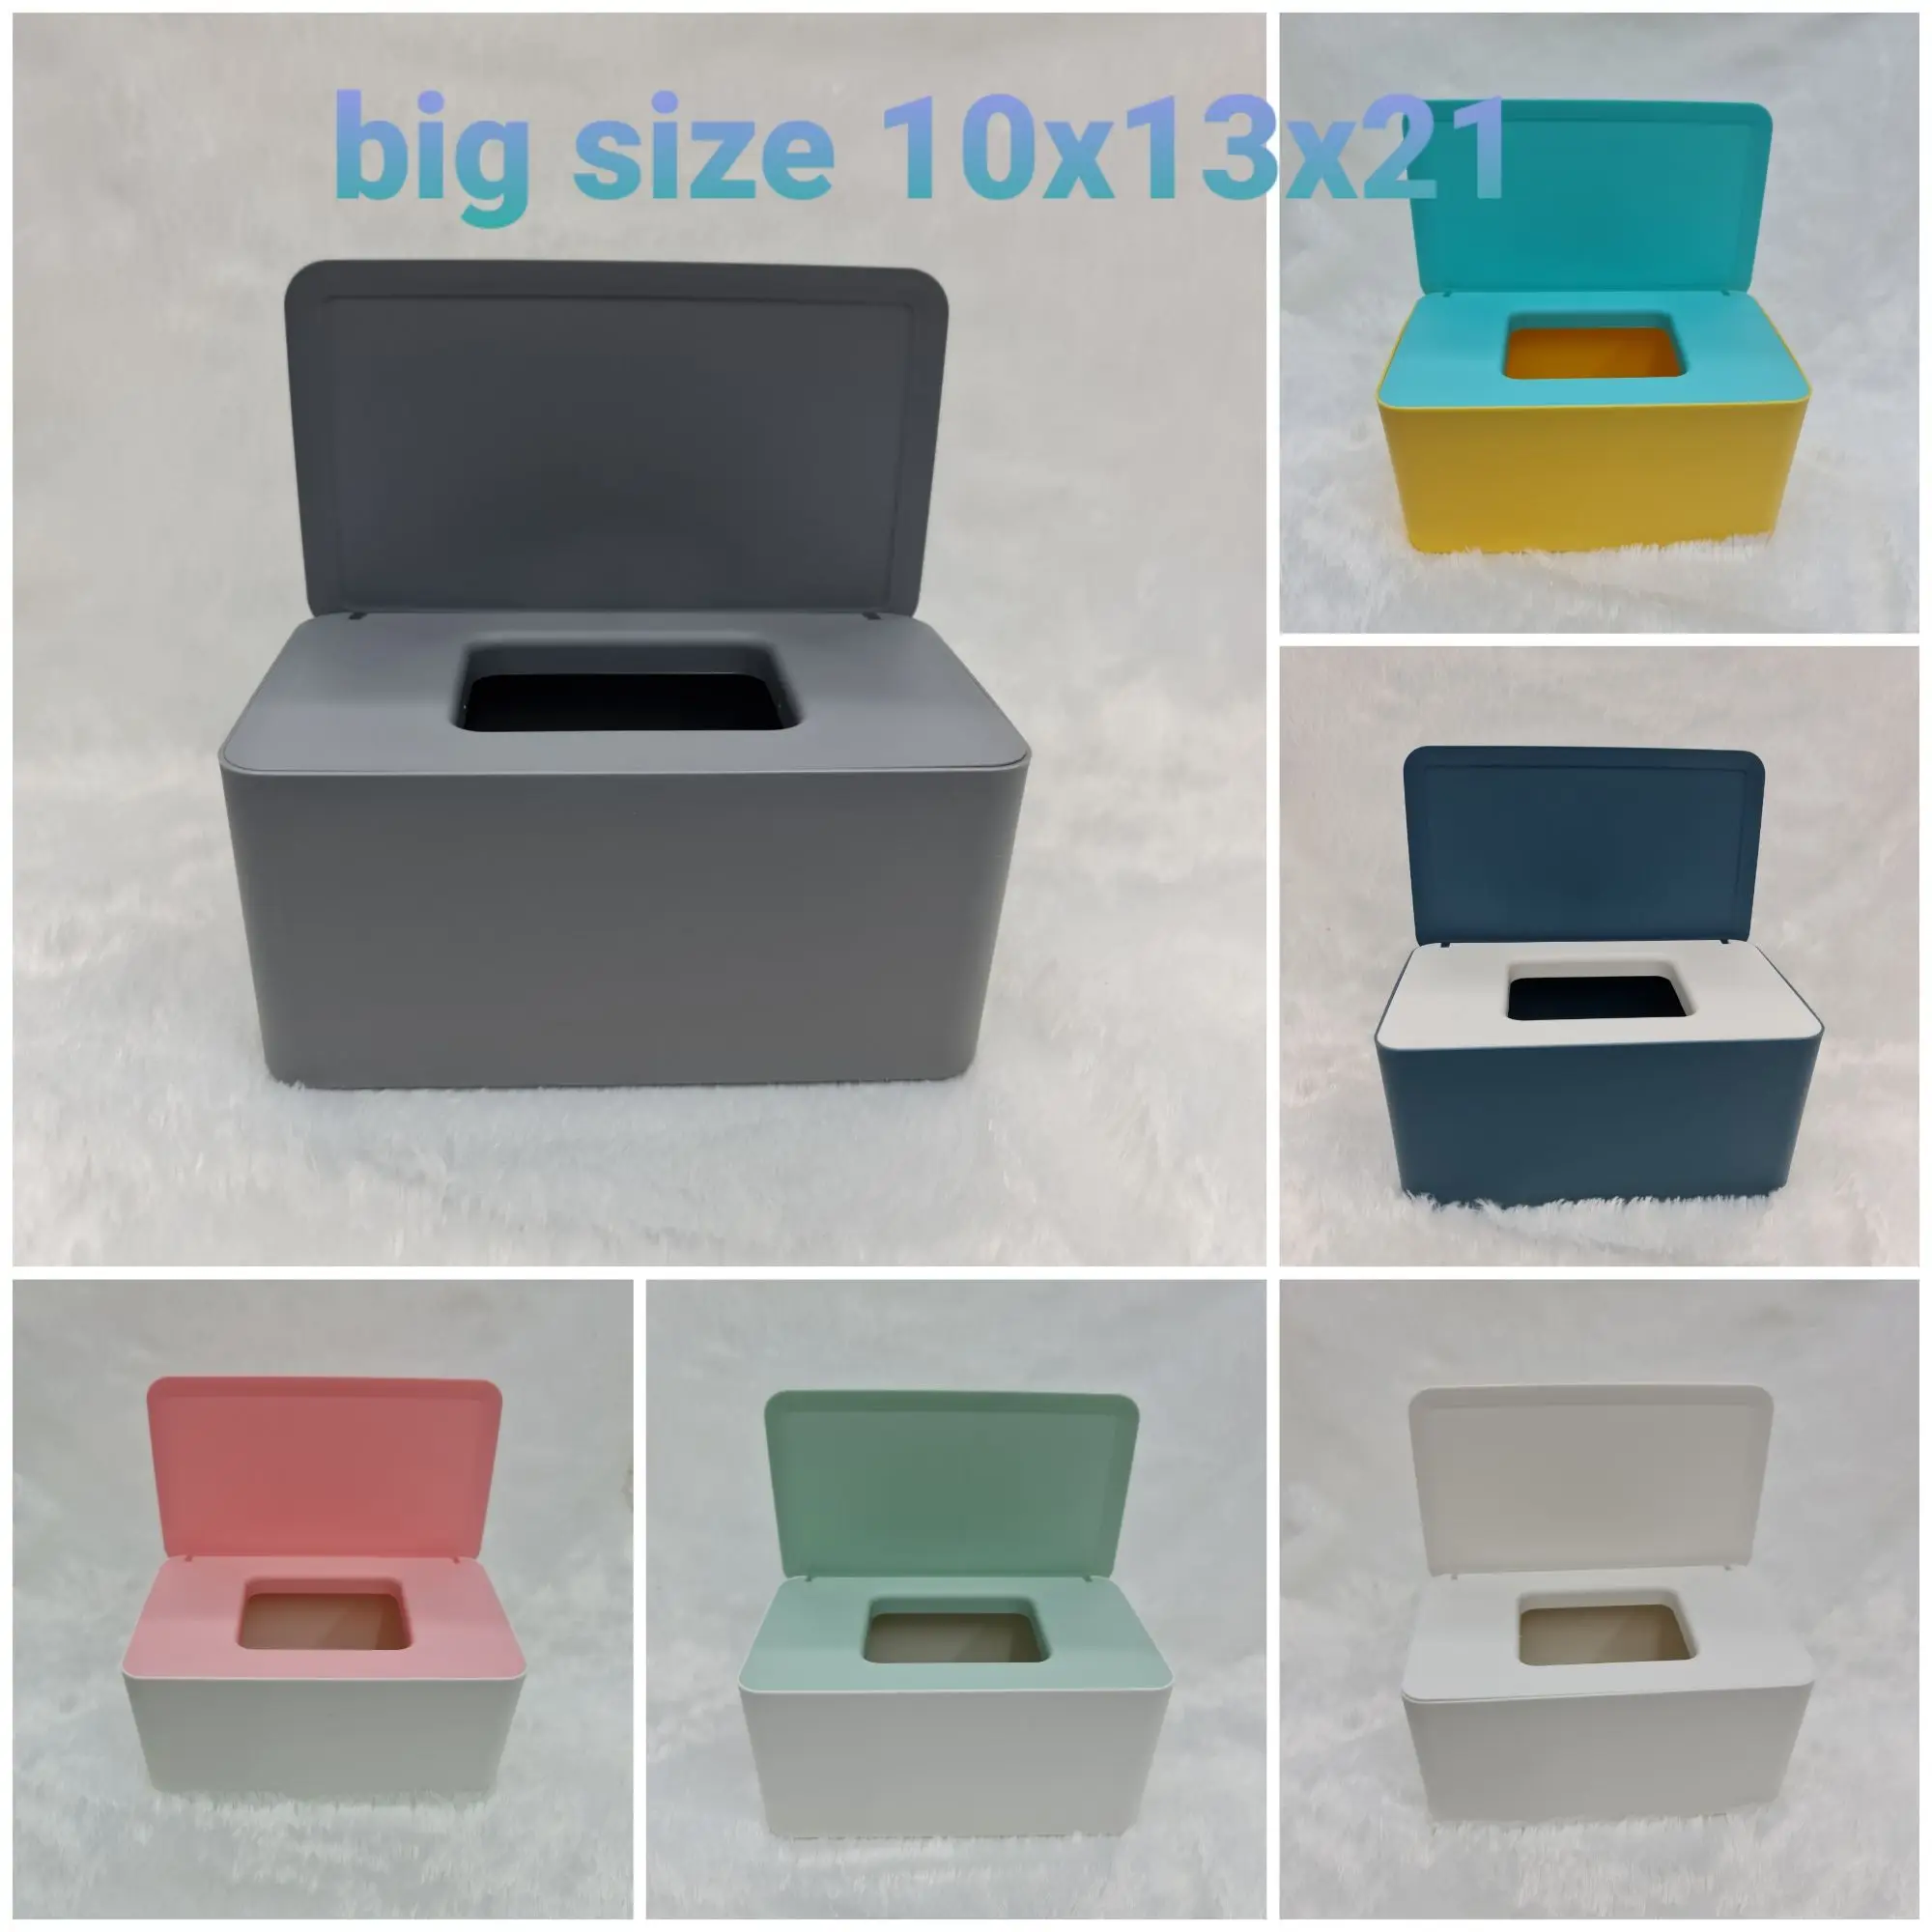 big size tissue holder disposable mask wetwipes dispenser with lid cover